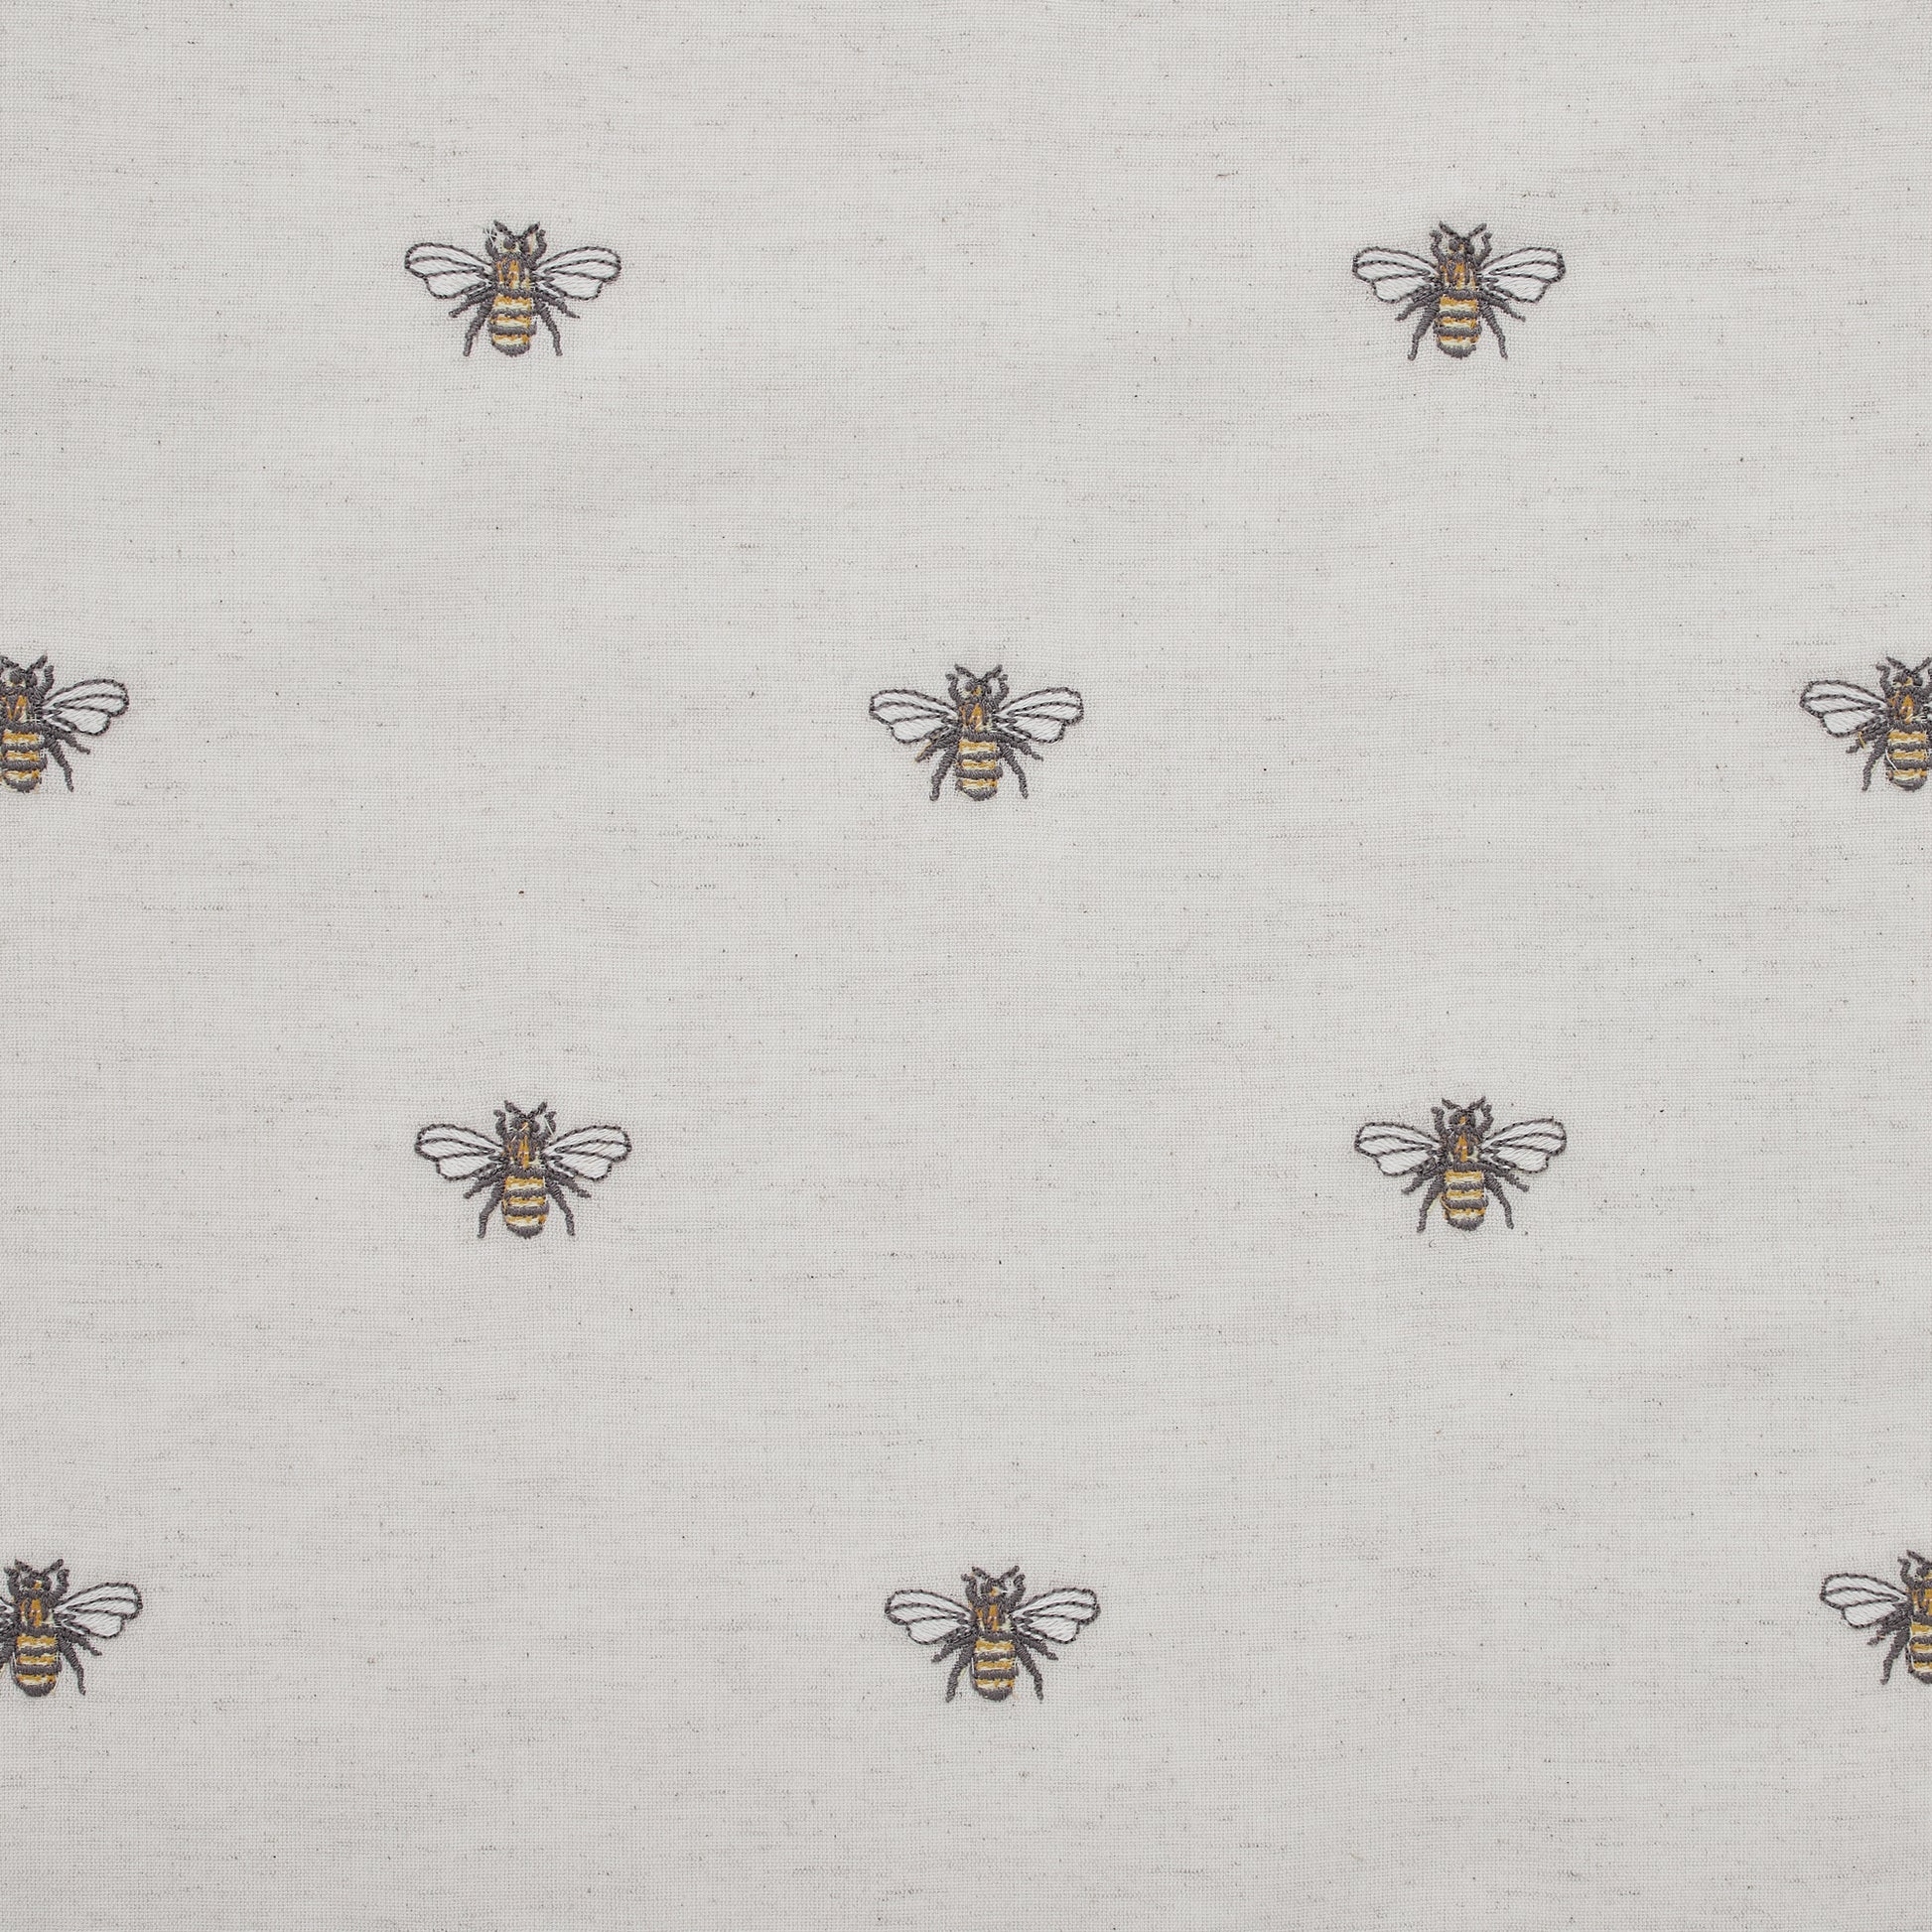 81269-Embroidered-Bee-Runner-13x36-image-5